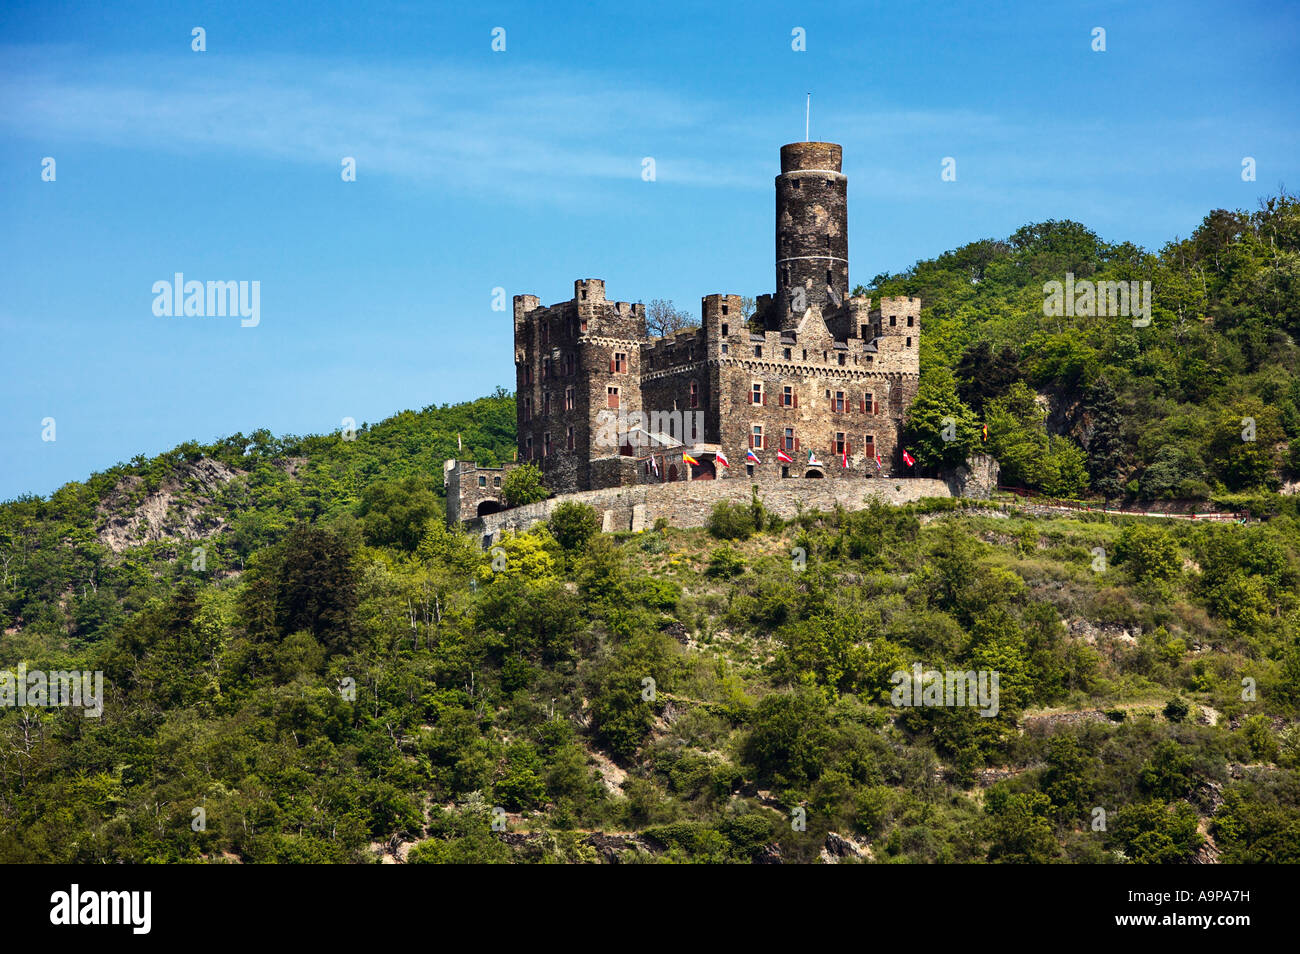 Castle Maus, Rhine Castle in the Rhine Valley above the village of Wellmich, Rhineland, Germany Europe Stock Photo